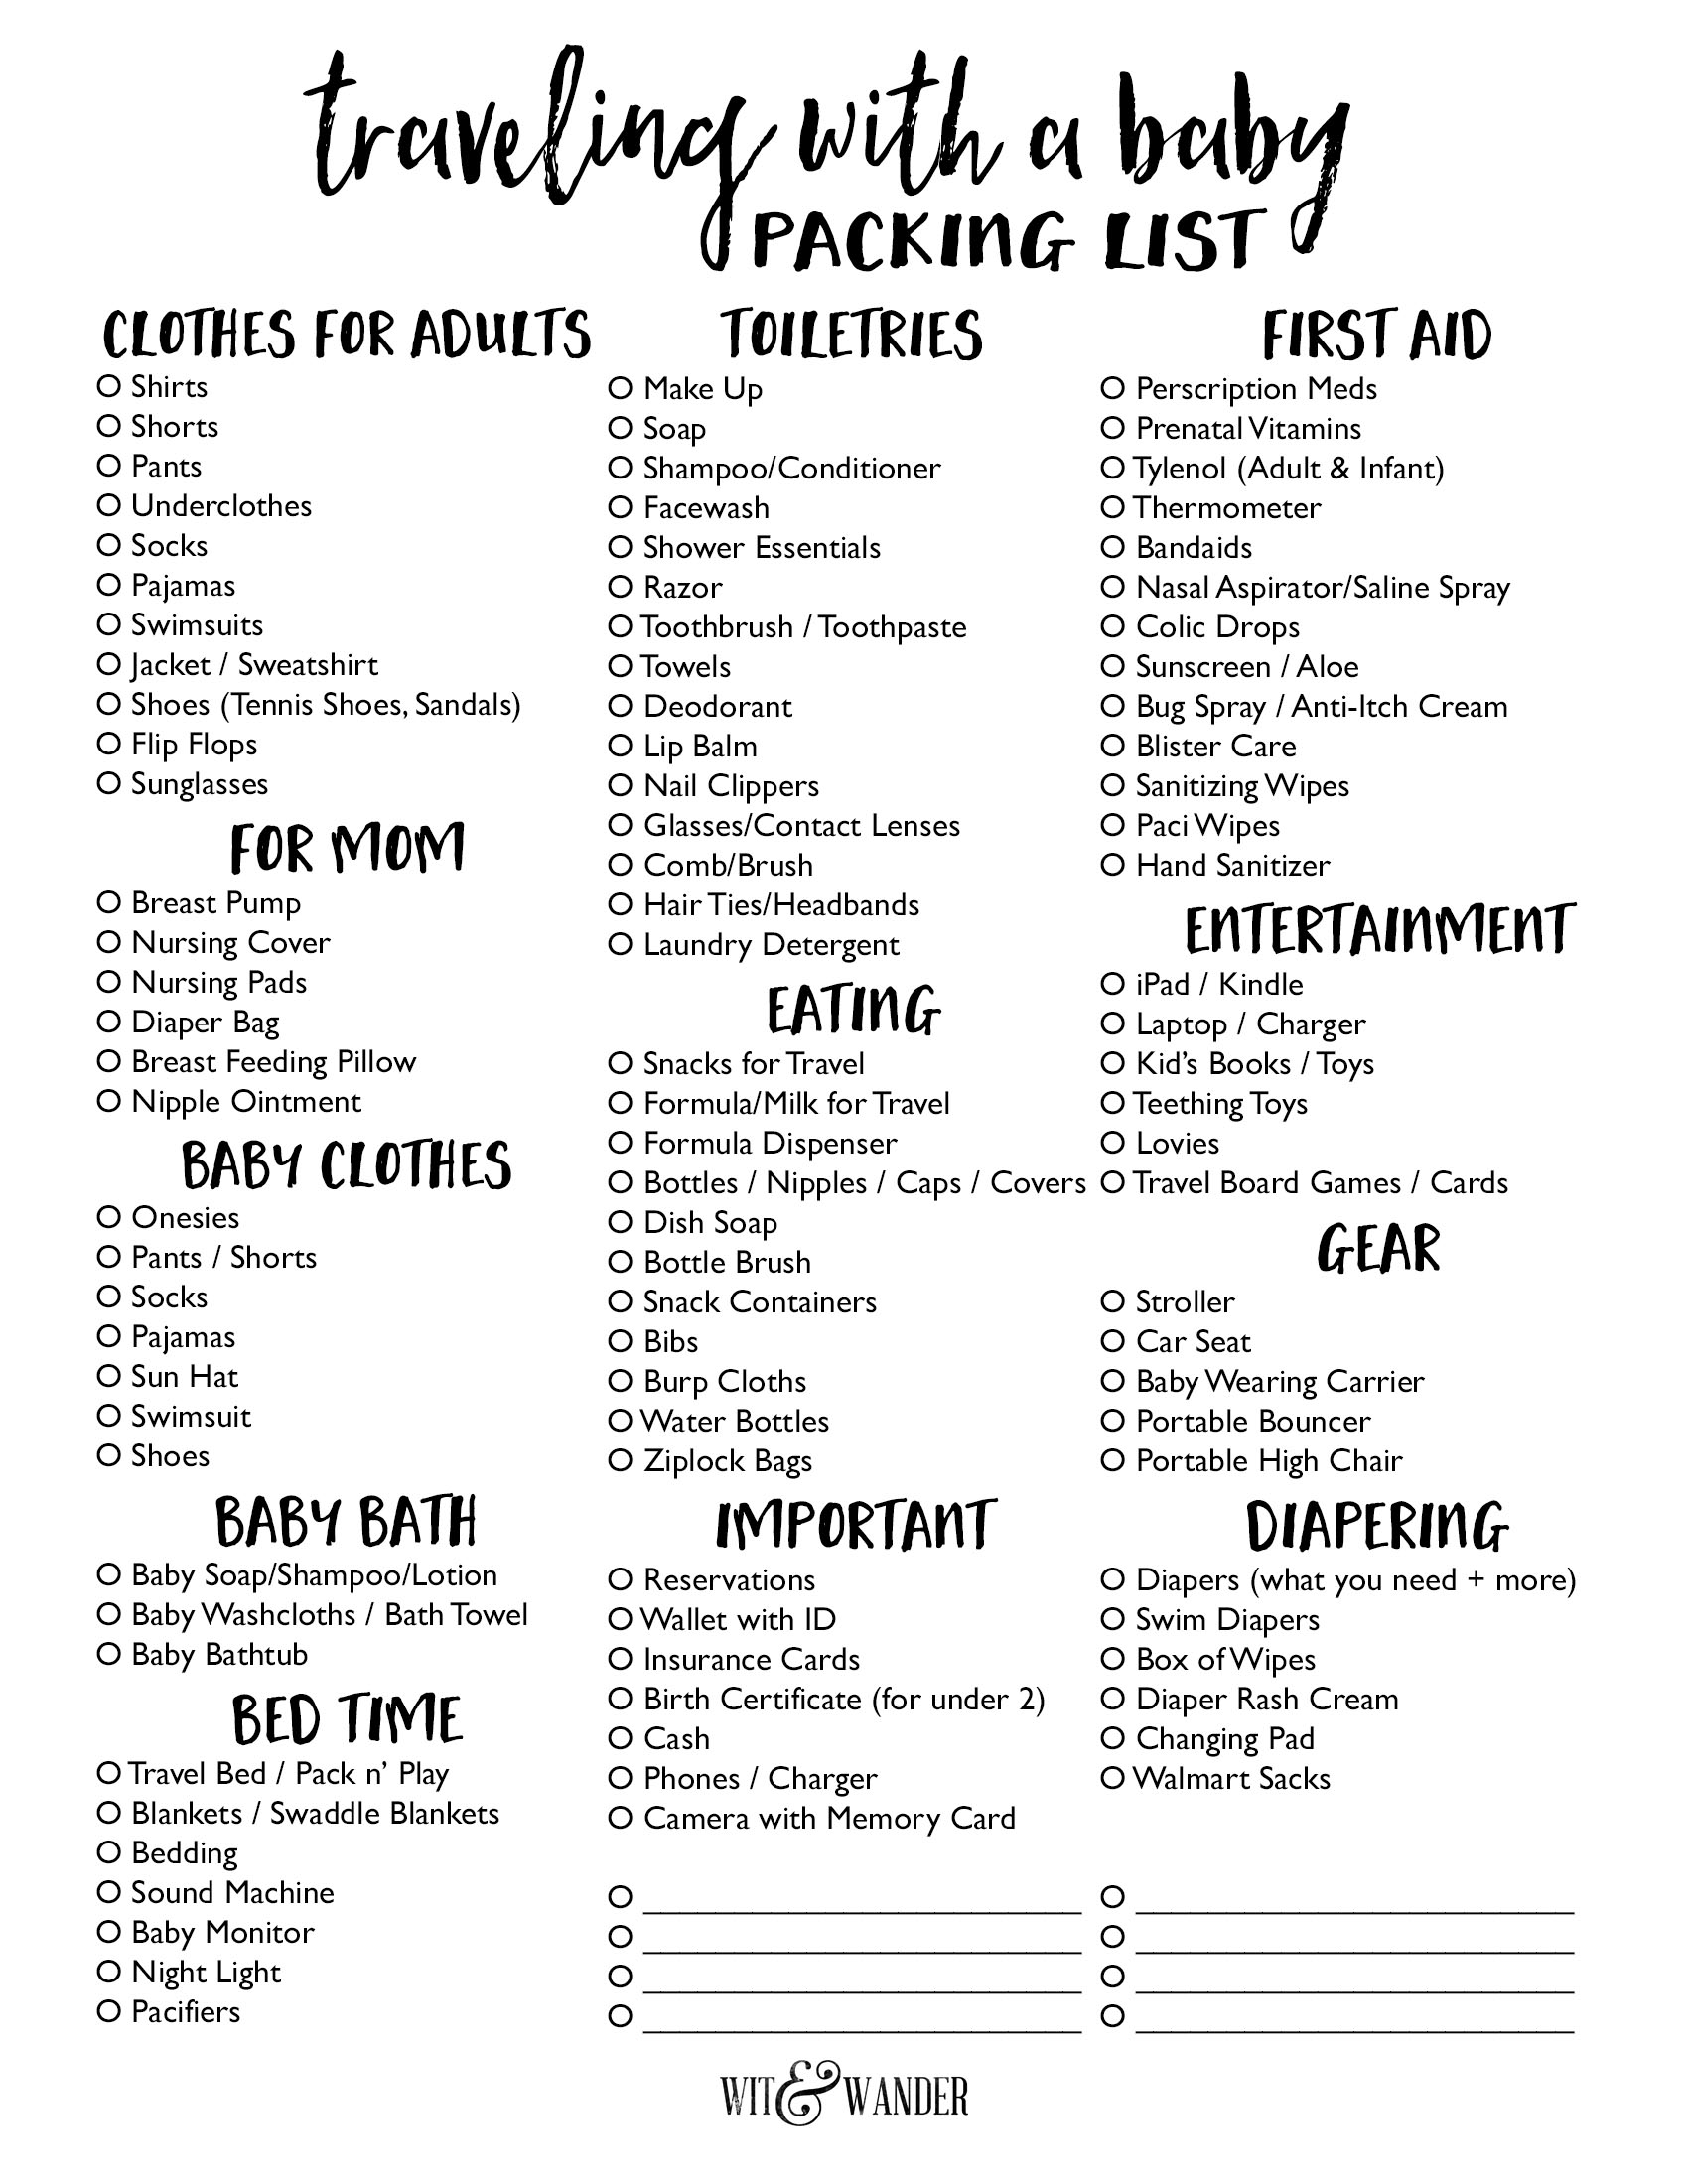 Packing List for Traveling with a Baby - Our Handcrafted Life